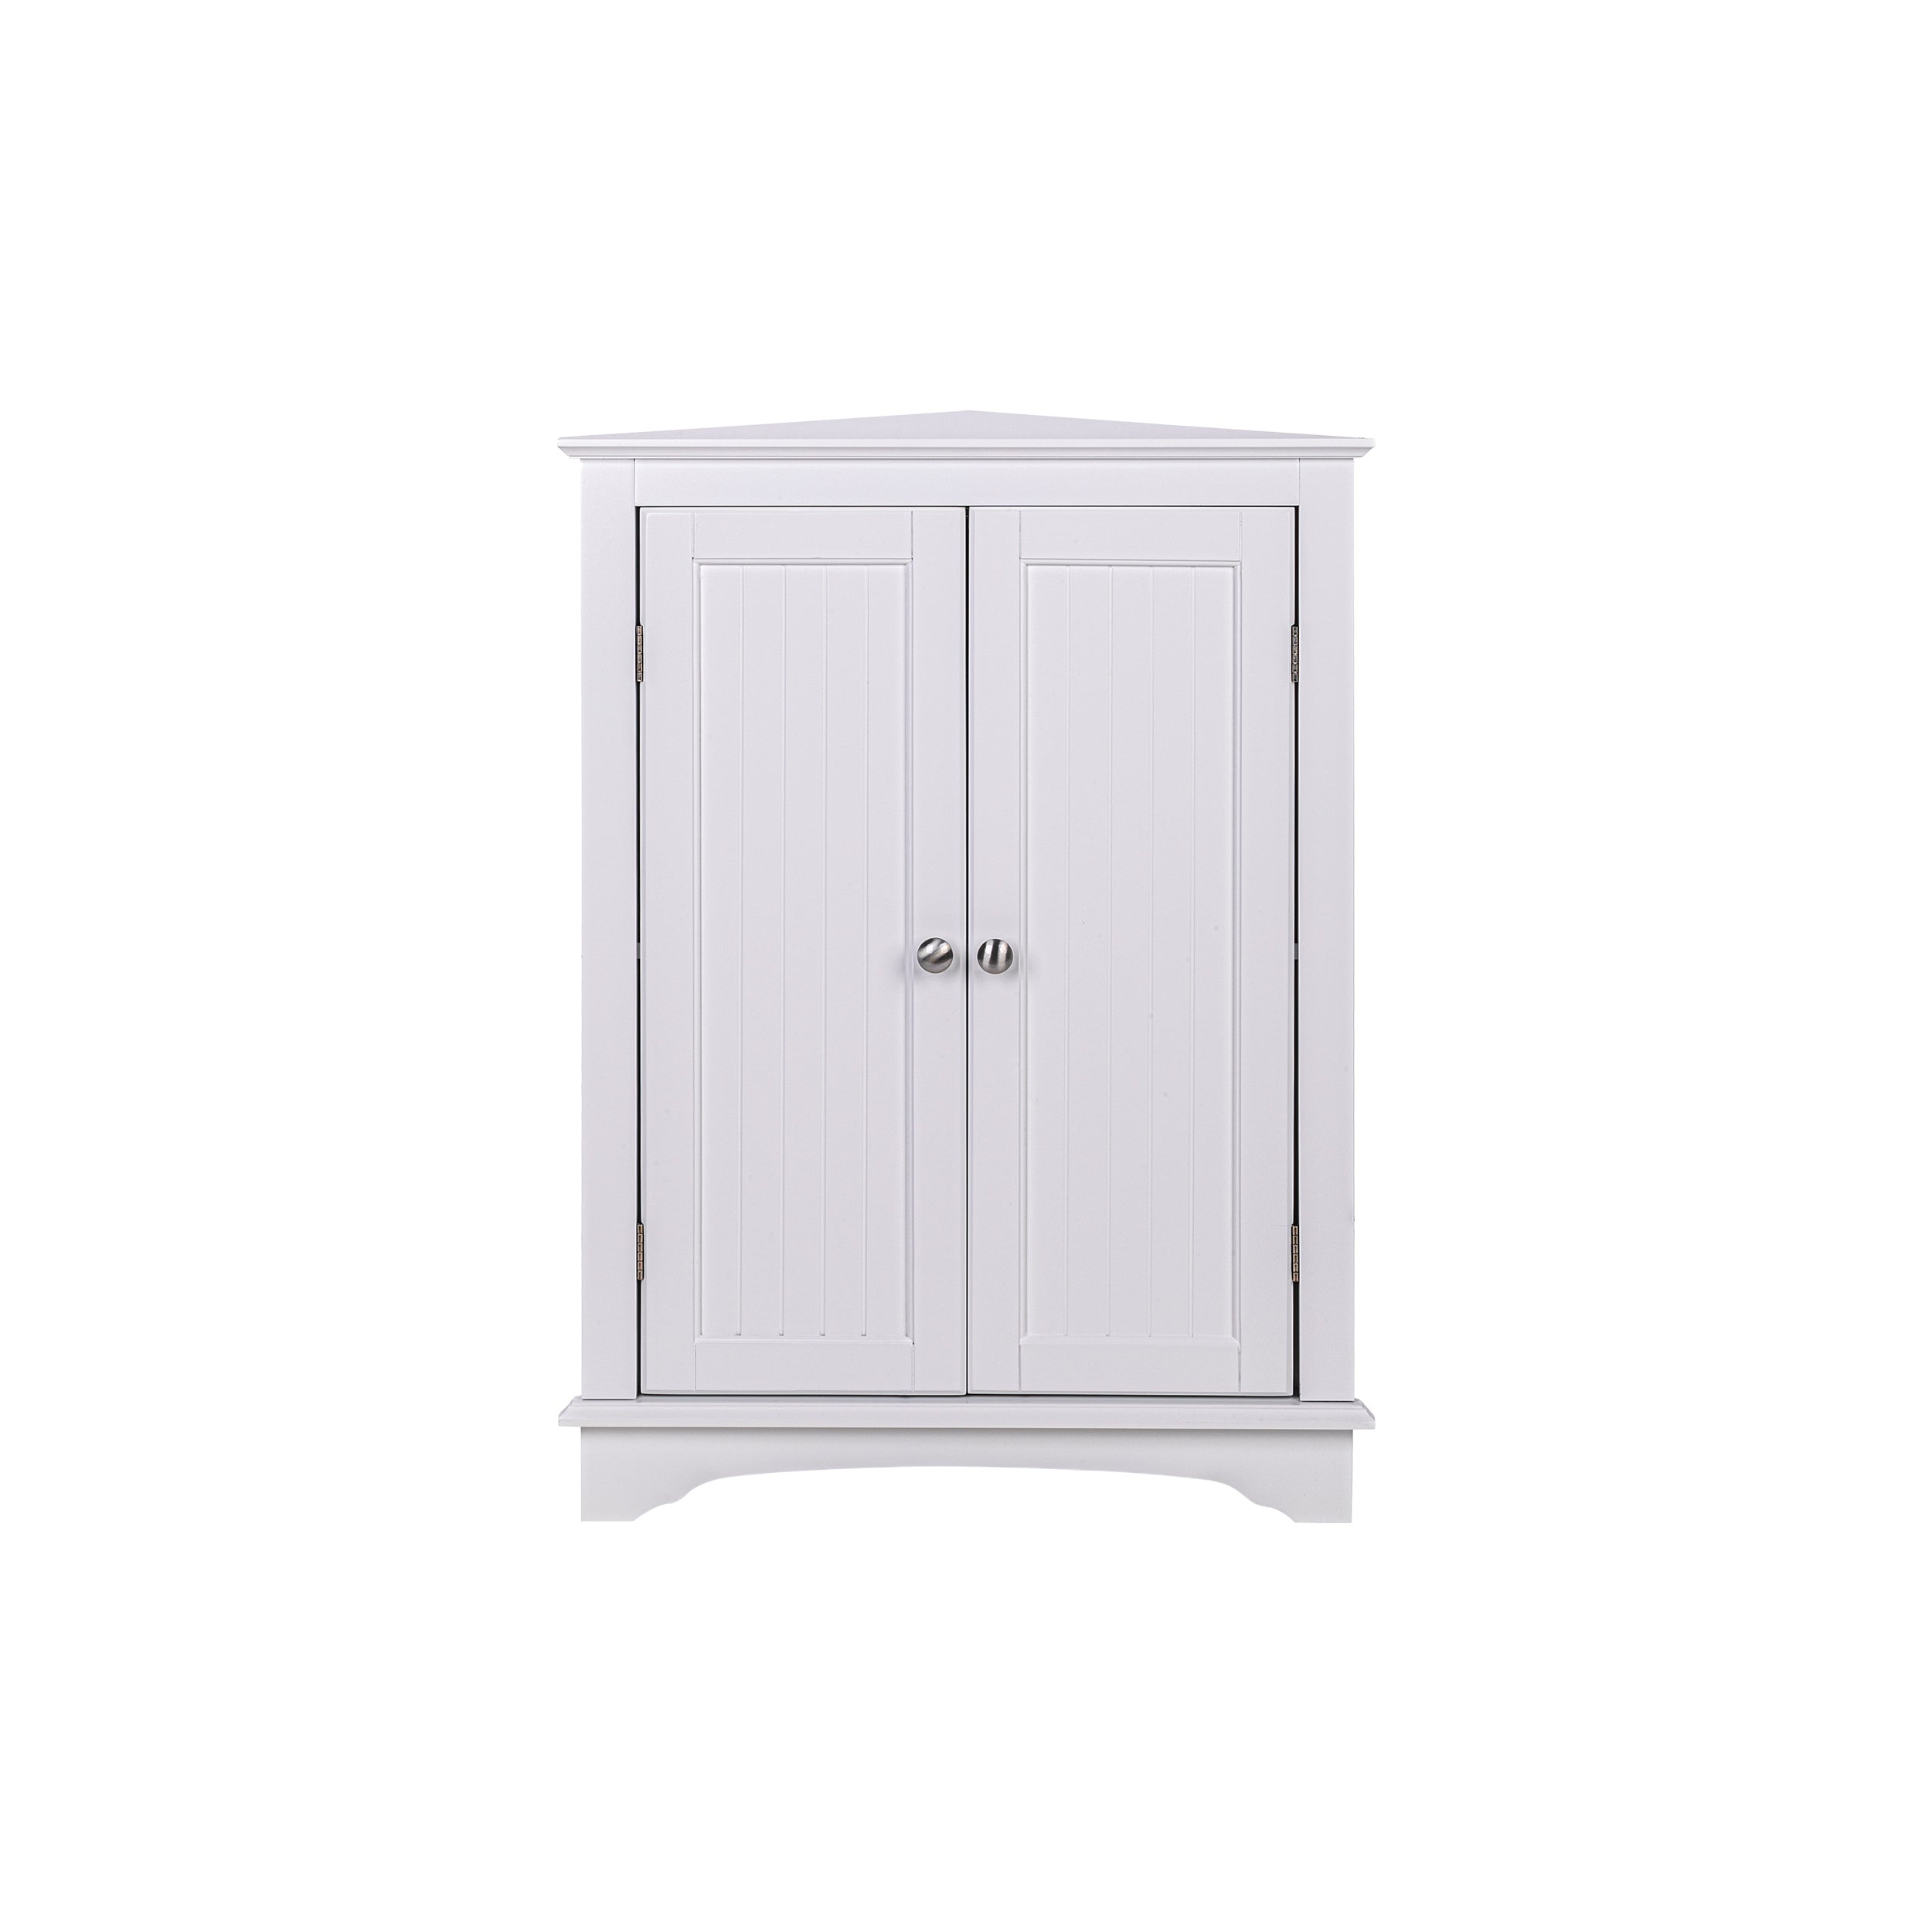  sogesfurniture Corner Cabinet with Doors and Shelves